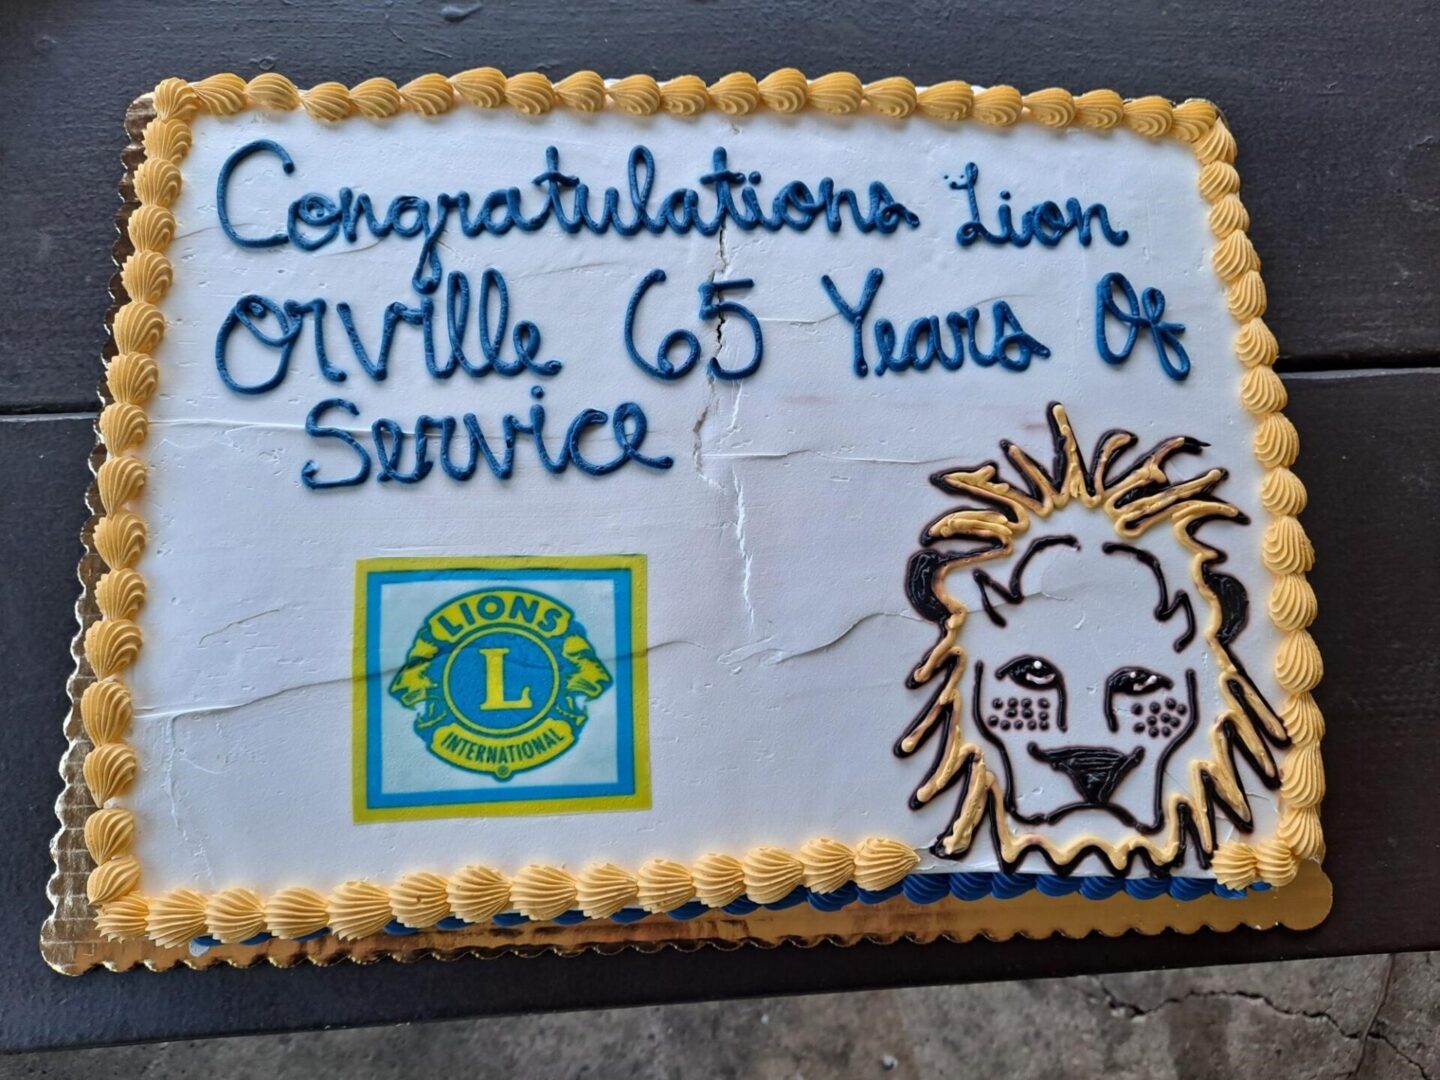 Closeup view of the cake with congratulations text